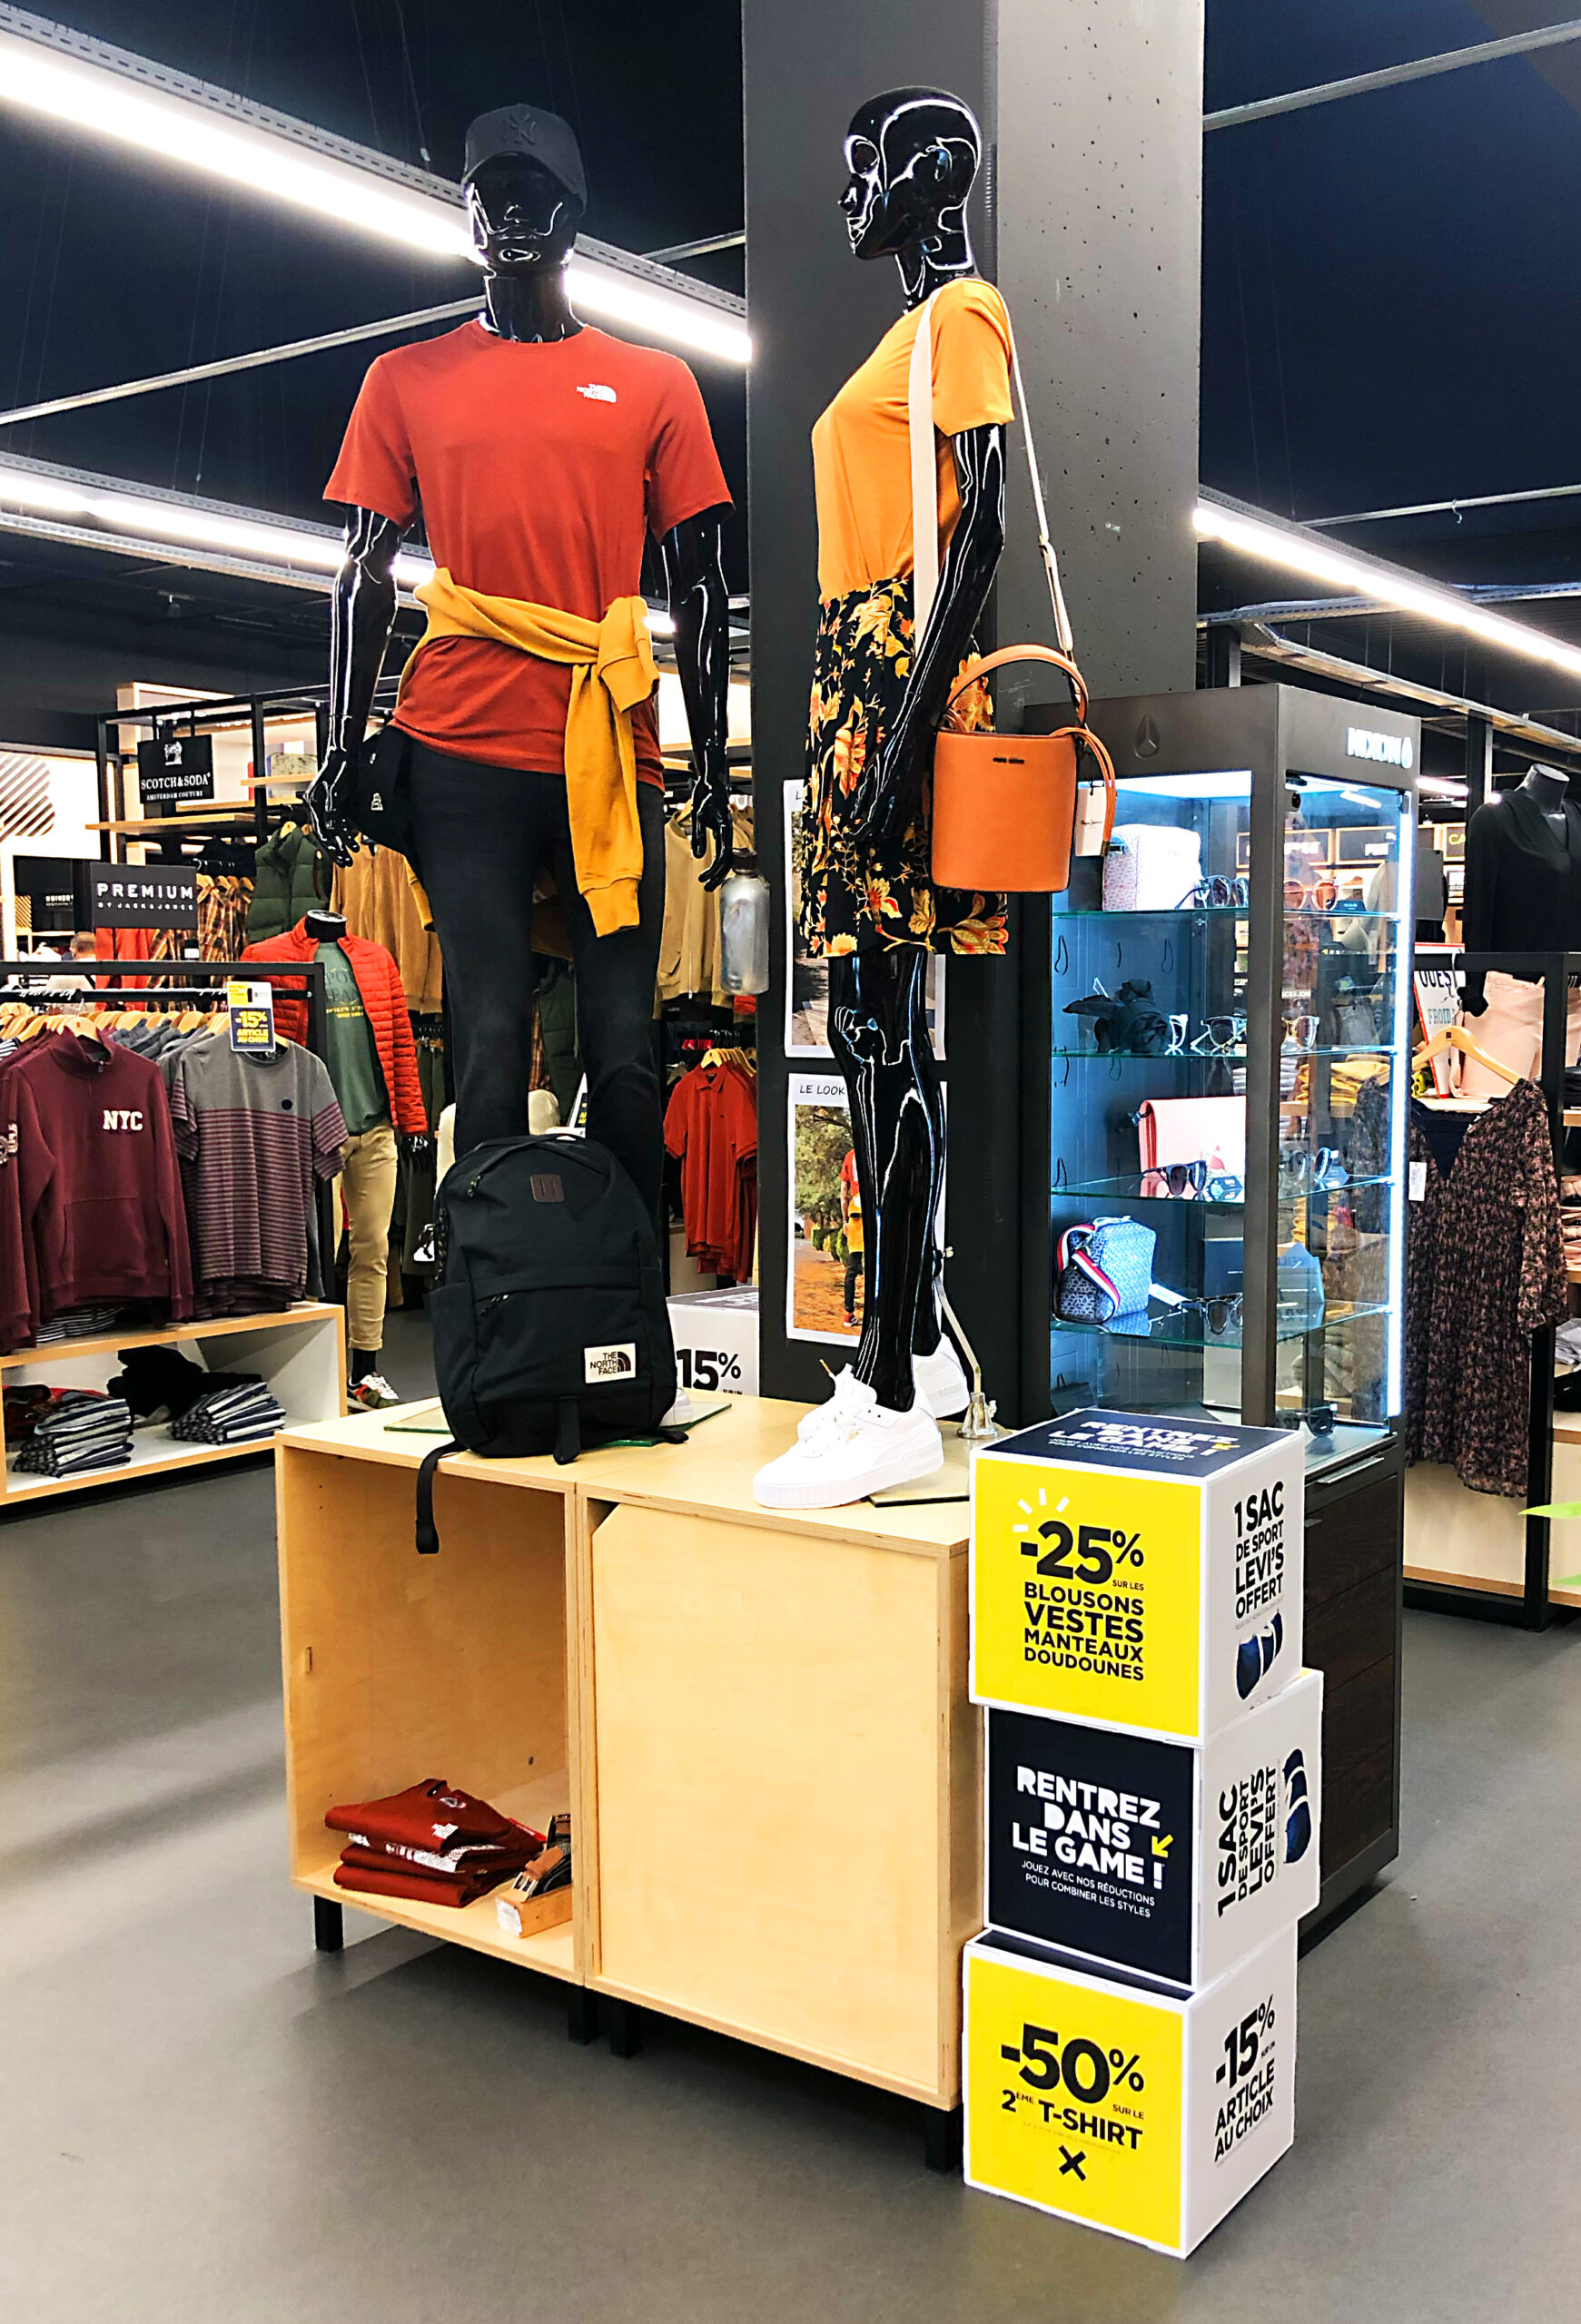 Mannequins at Blackstore with promotional signage